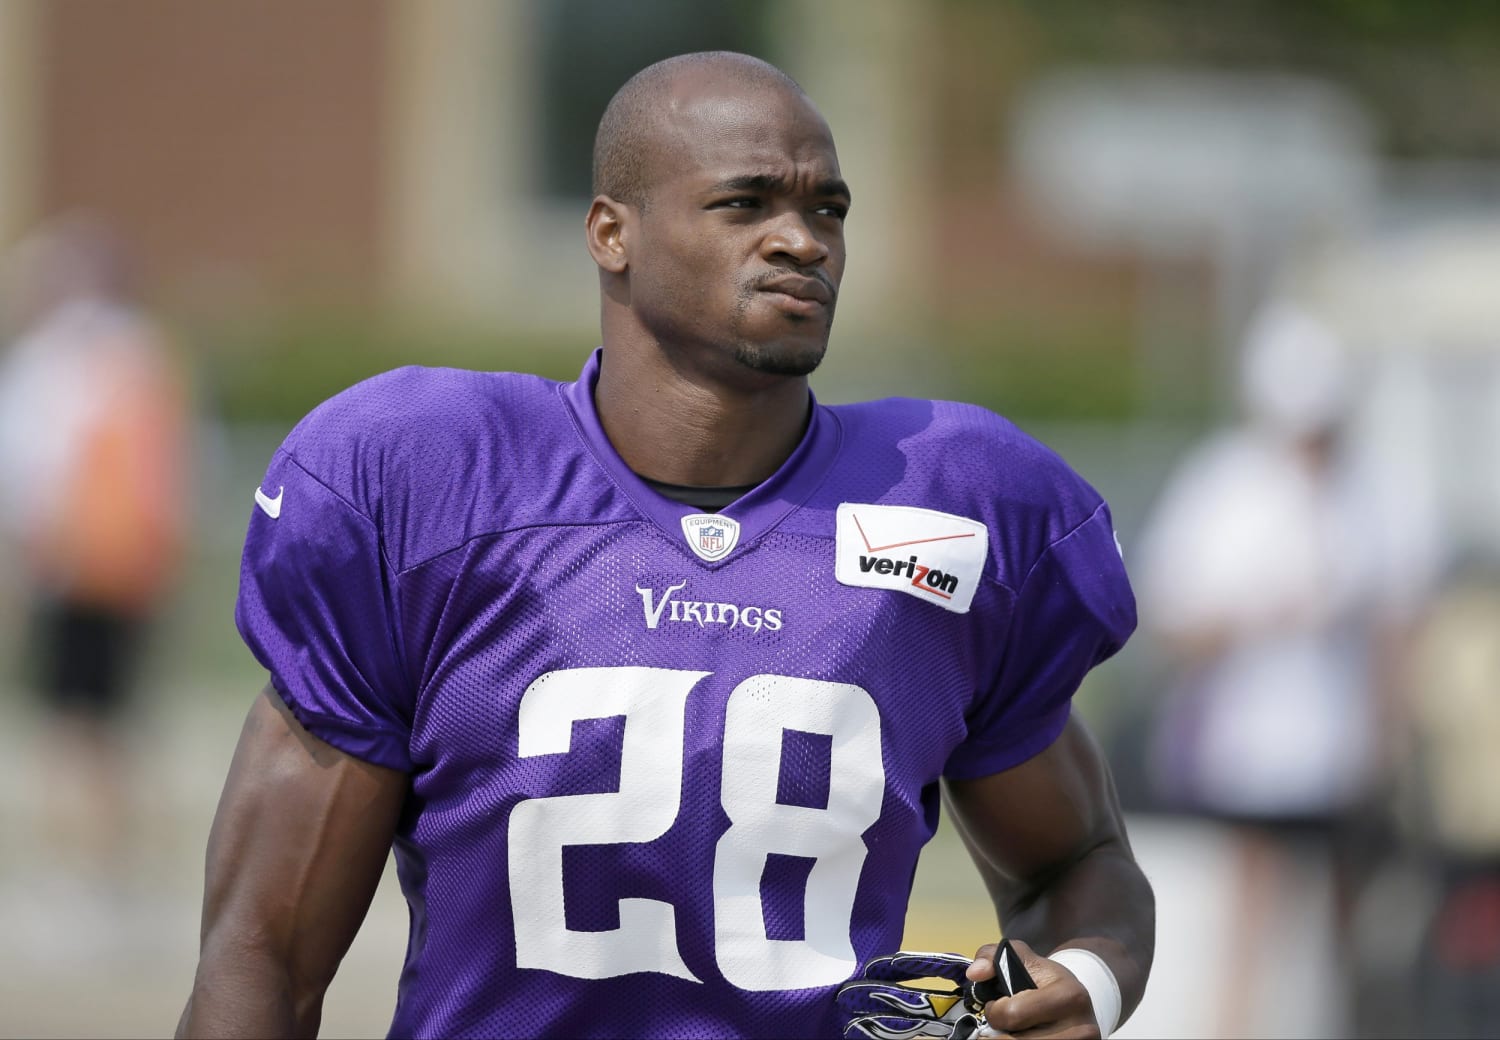 Vikings owner says Adrian Peterson will play this week - NBC Sports